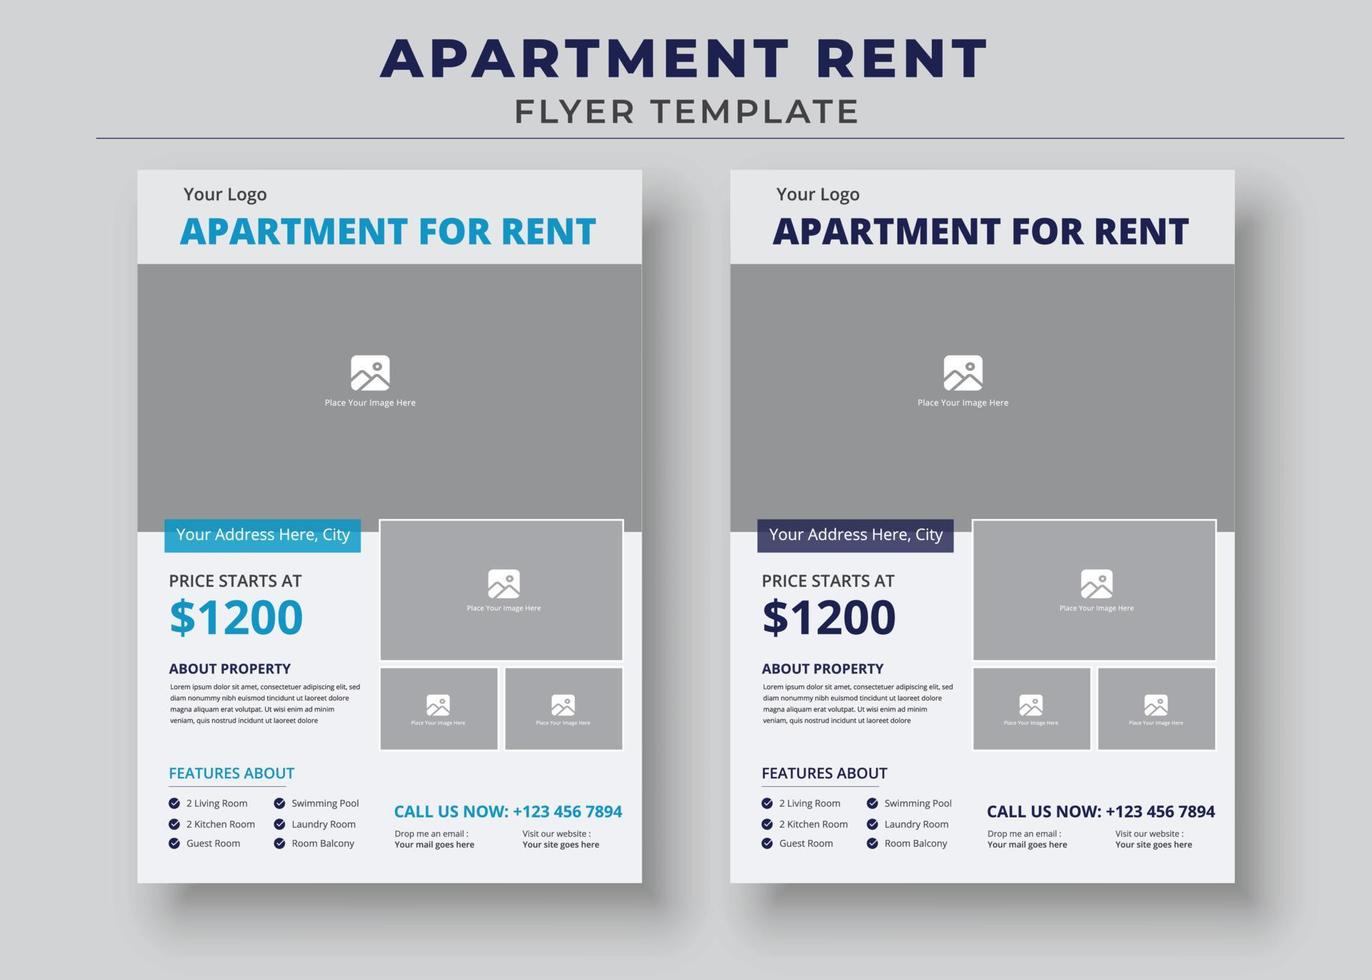 Apartment Rent Flyer Template, Home For Rent Flyer, Real Estate Flyer vector